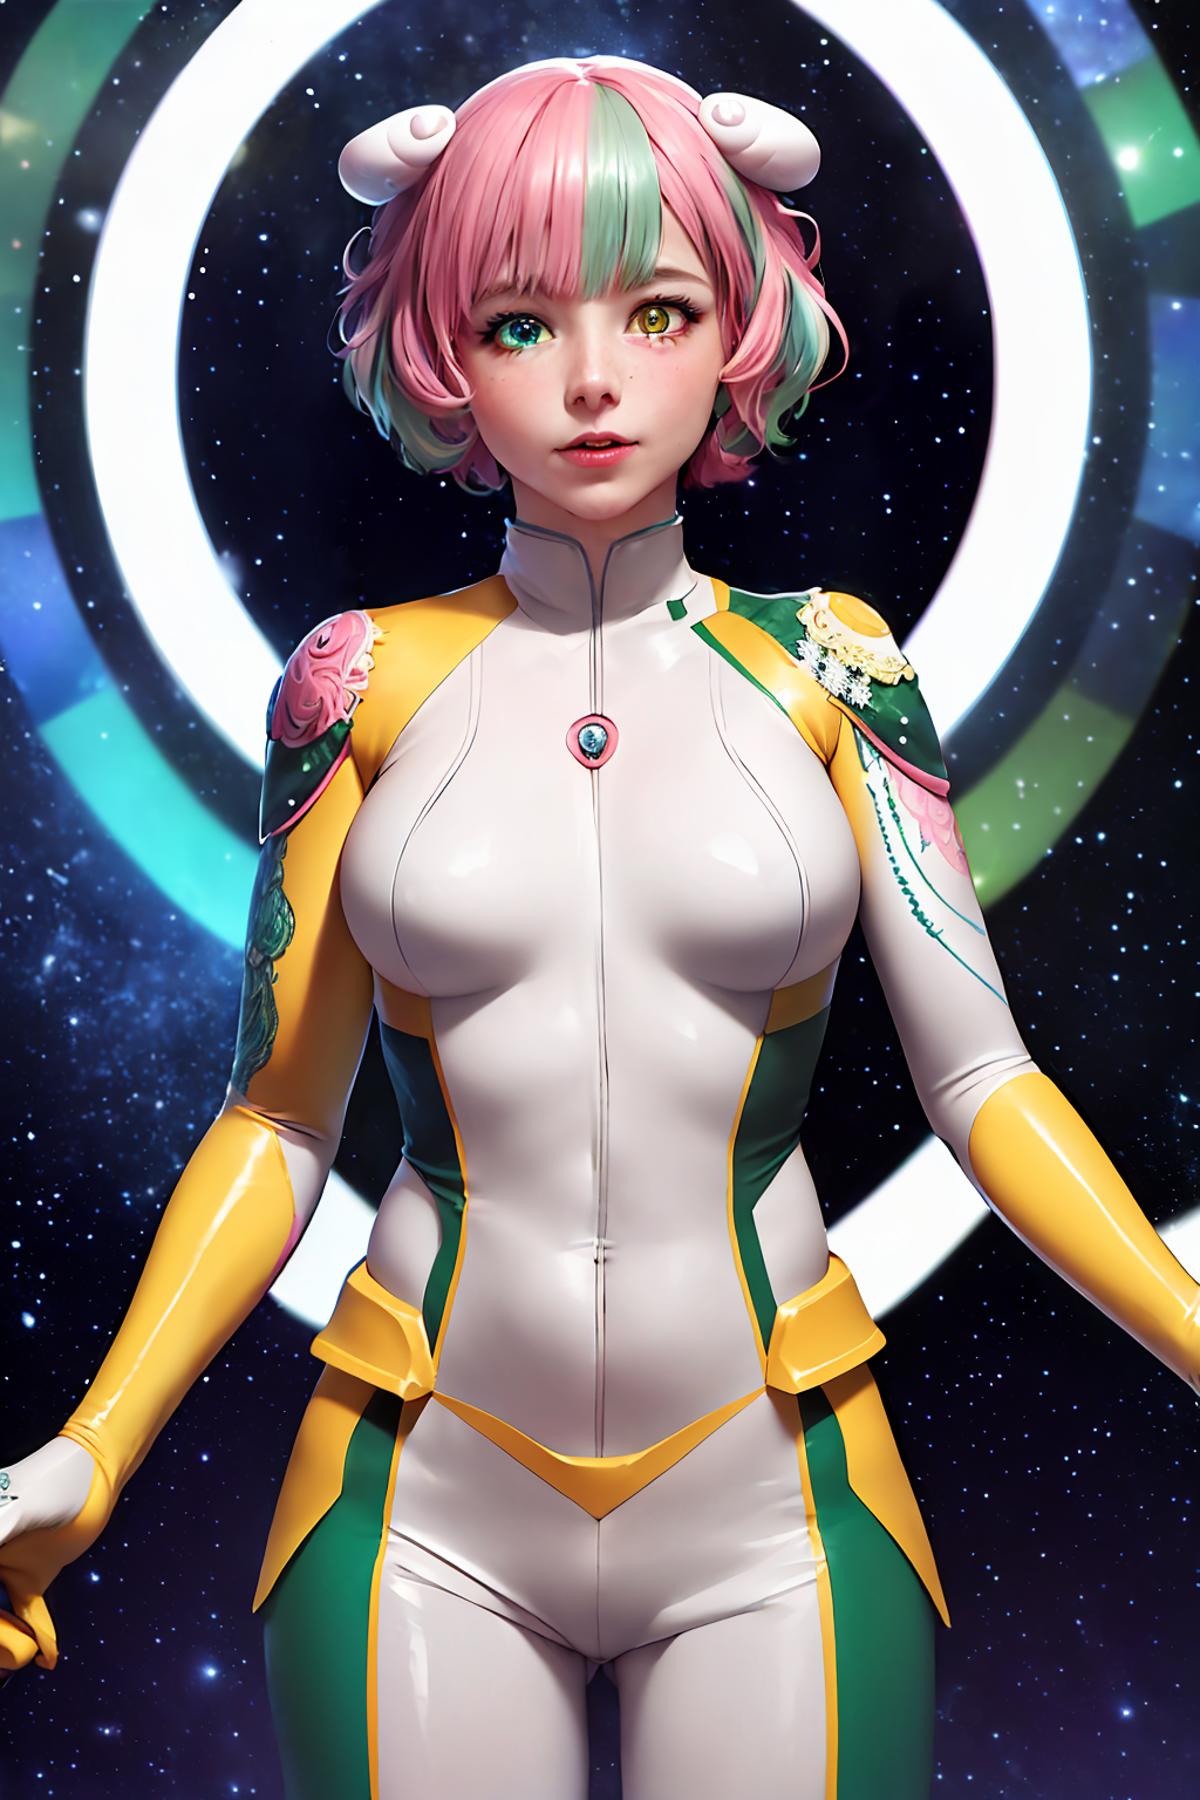 Aries Spring (Astra Lost in Space / Kanata no Astra) image by allureAI